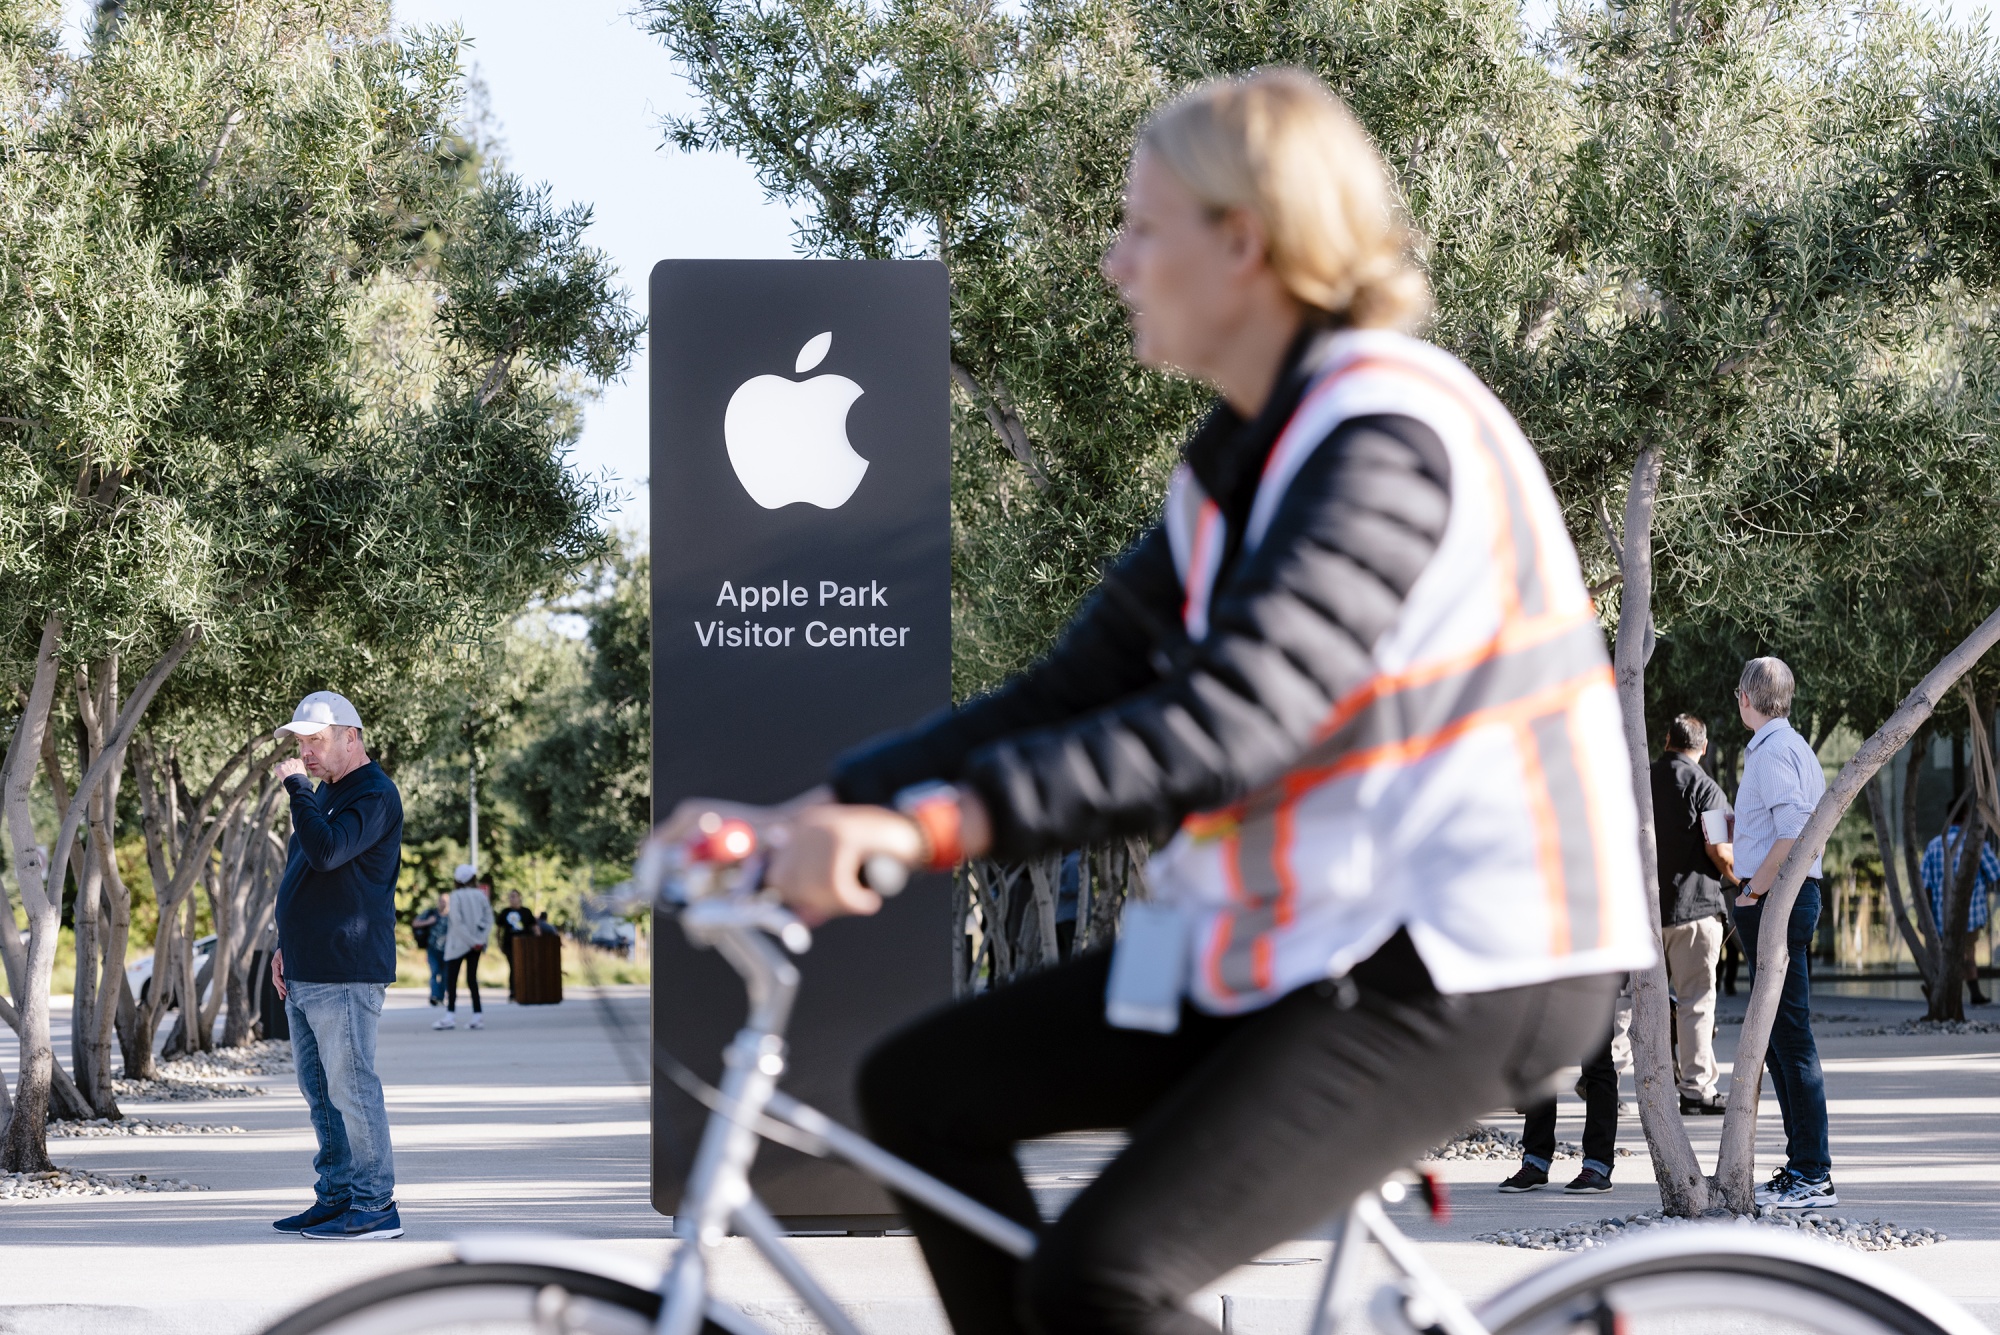 Like many tech giants, Apple invested heavily in building&nbsp;a Silicon Valley headquarters&nbsp;to keep its employees close at hand. But there may be benefits to spreading then out.&nbsp;